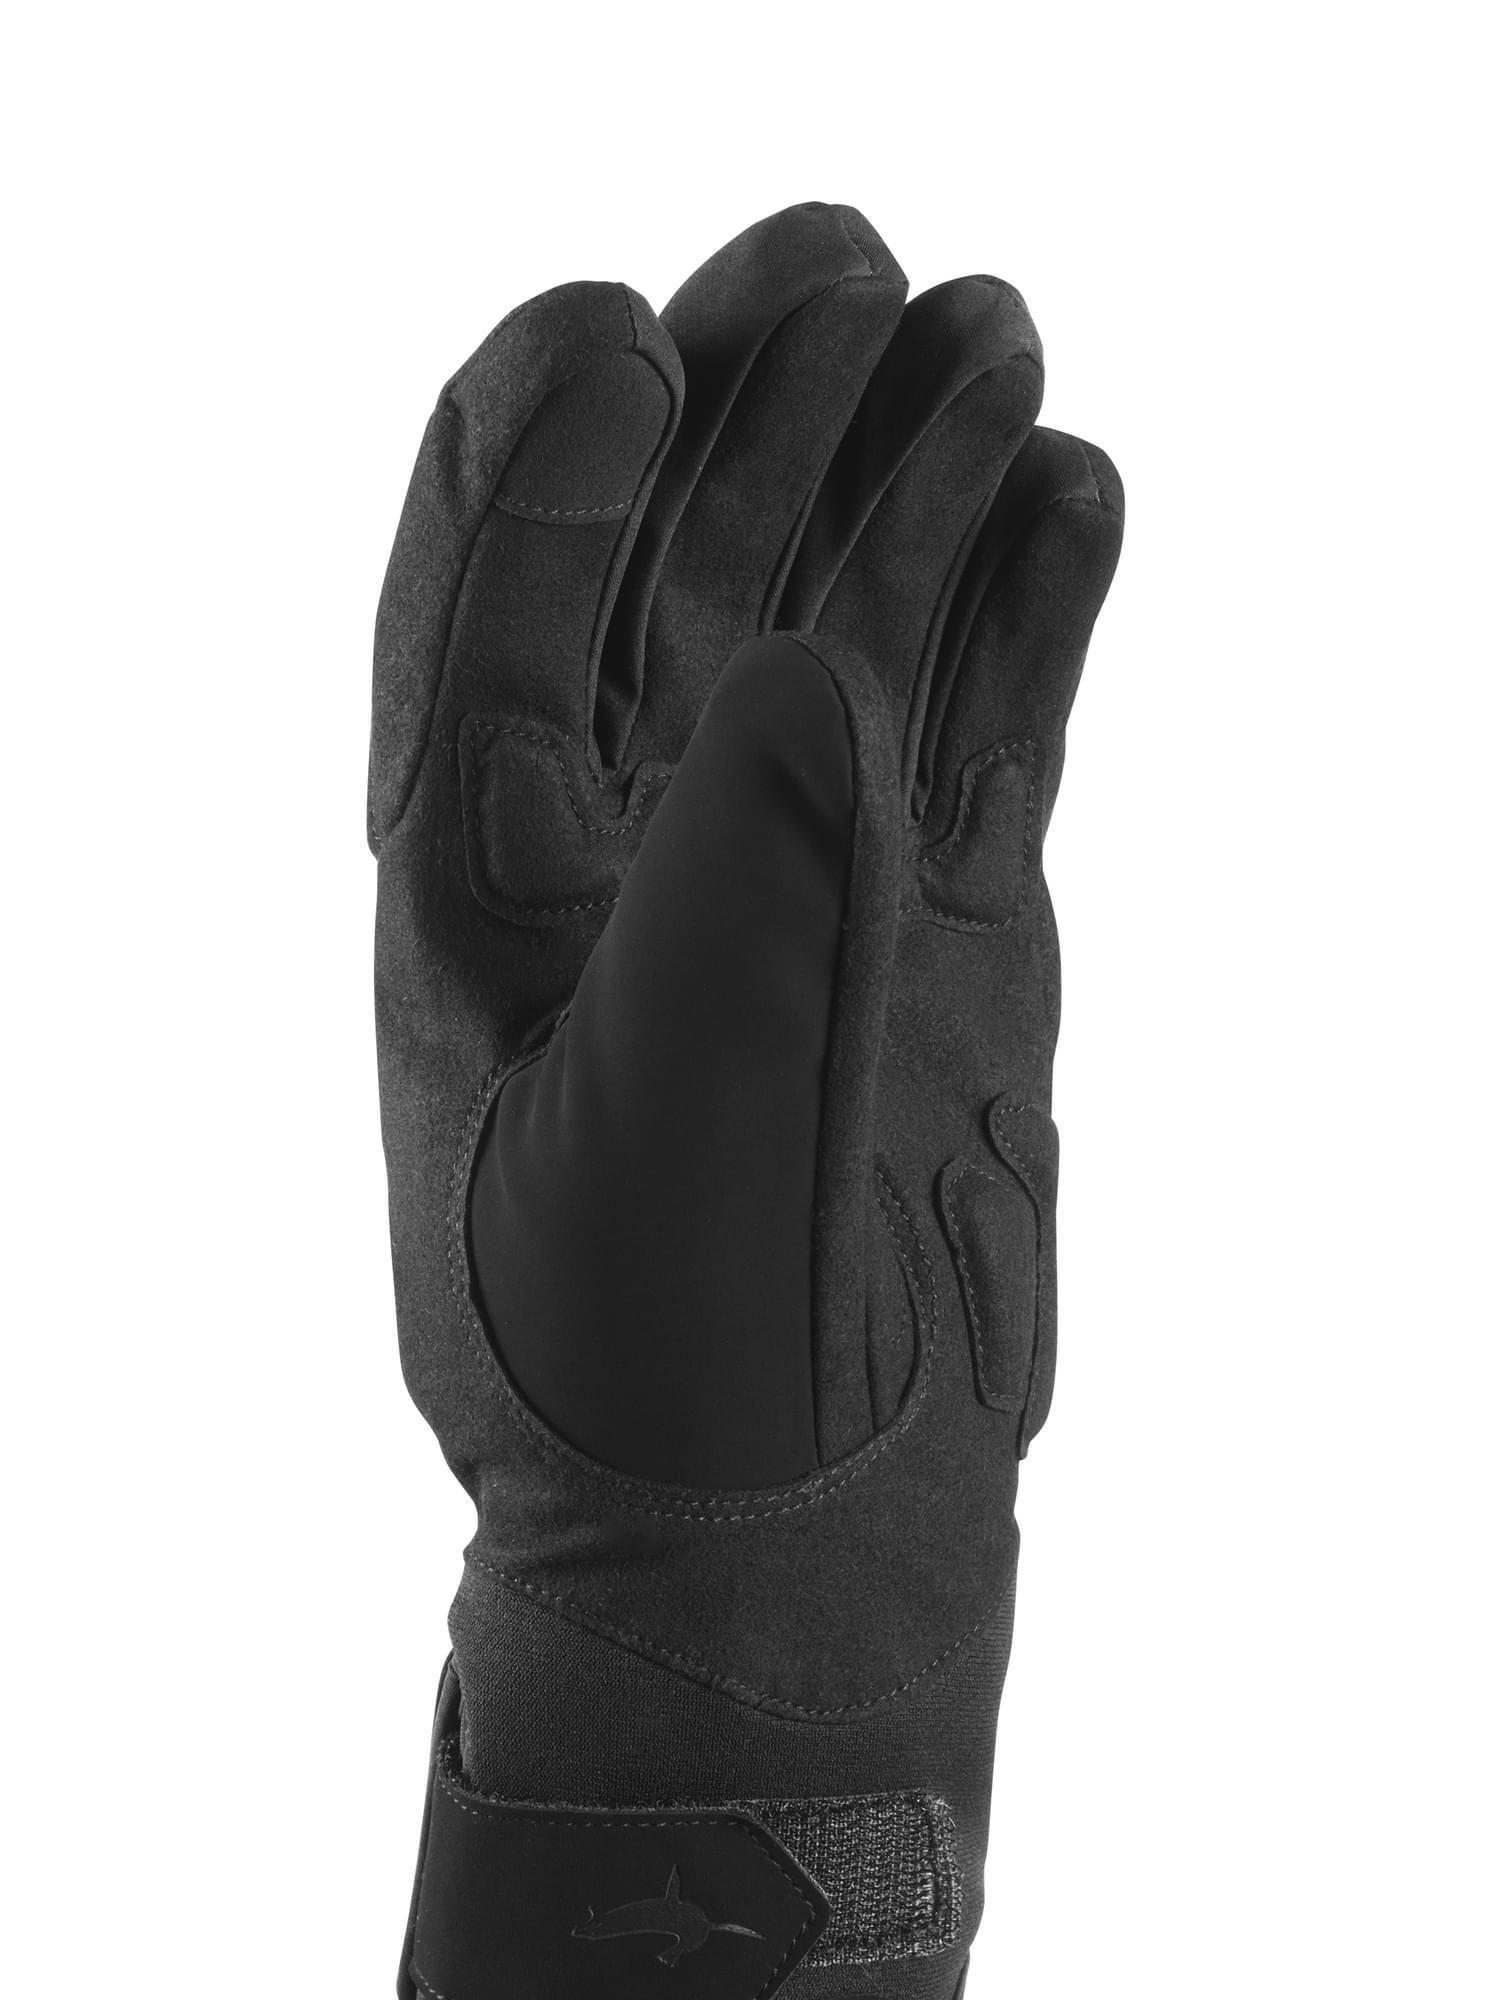 Mens Waterproof All Weather Cycle Gloves 2/3